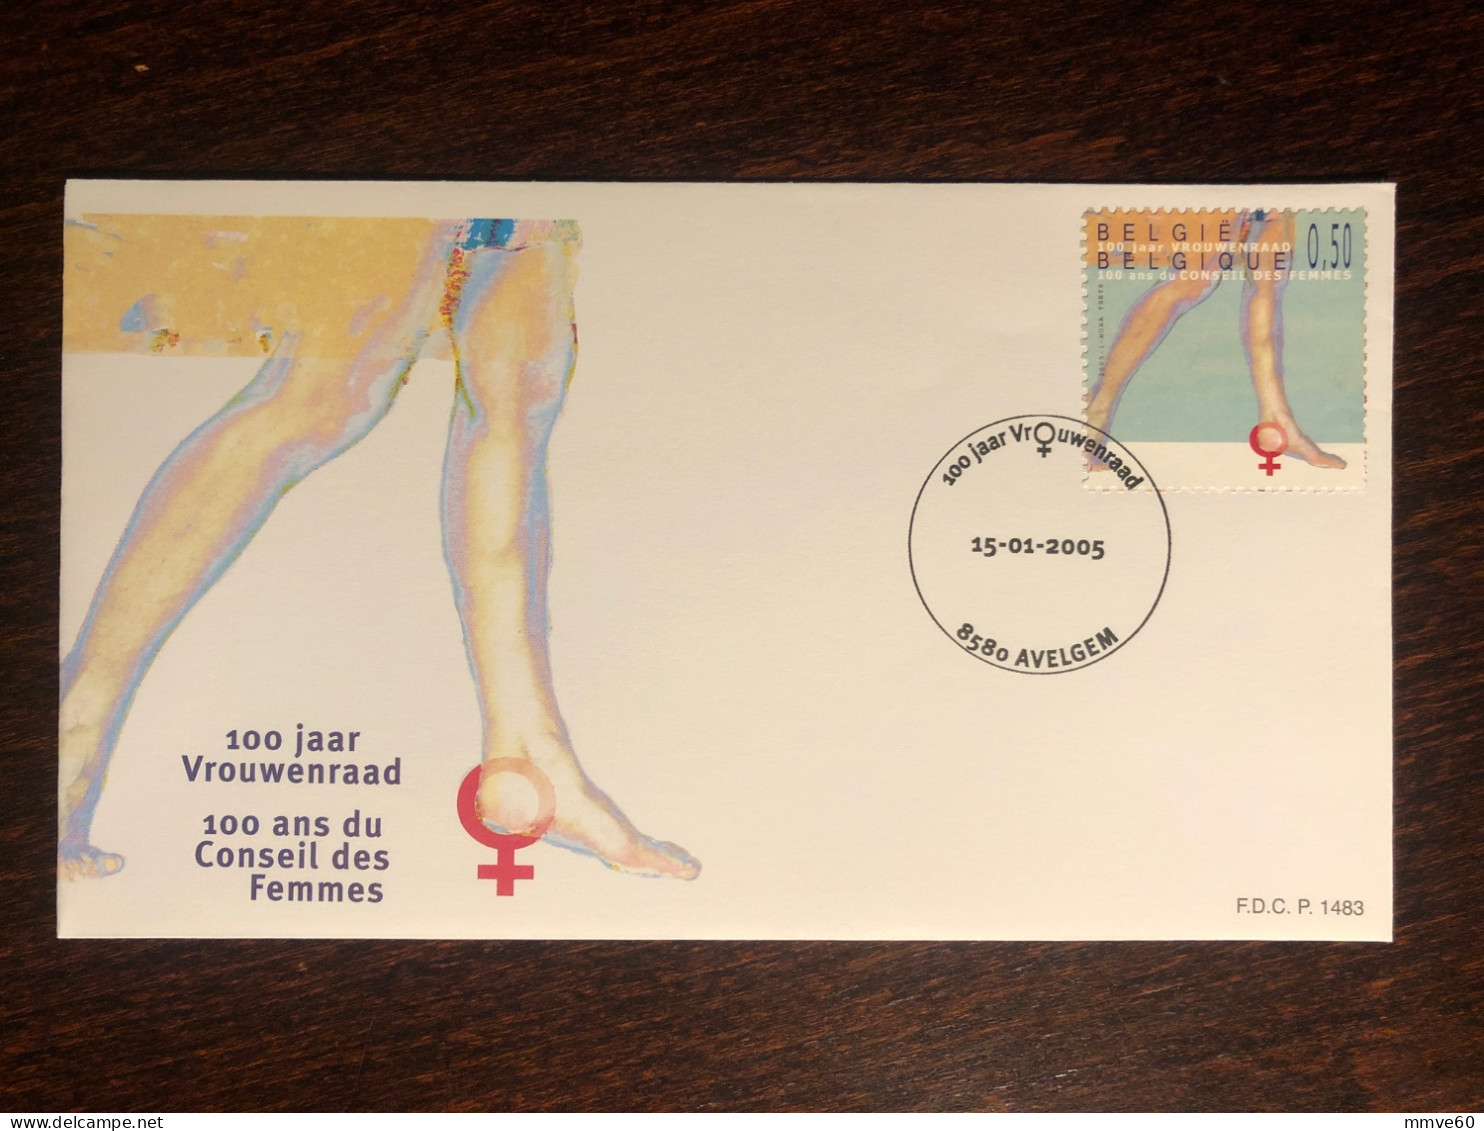 BELGIUM FDC COVER 2005 YEAR WOMEN  HEALTH MEDICINE STAMPS - Covers & Documents